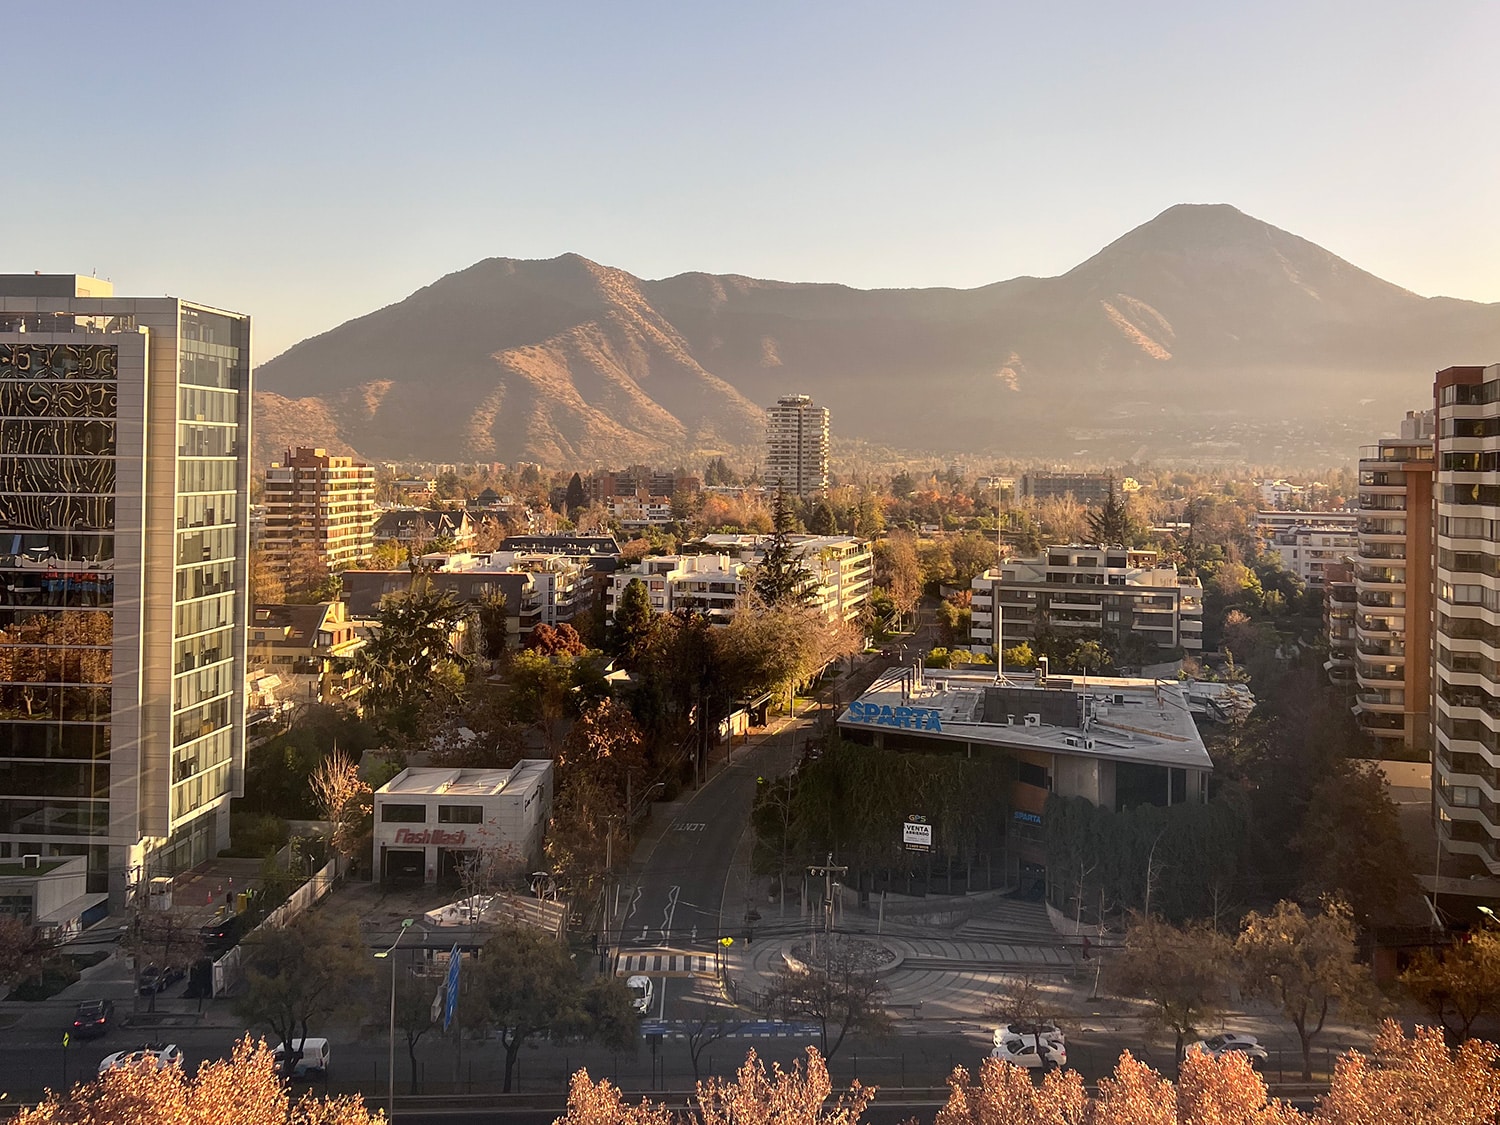 A view of the city of Santiago, Chile.